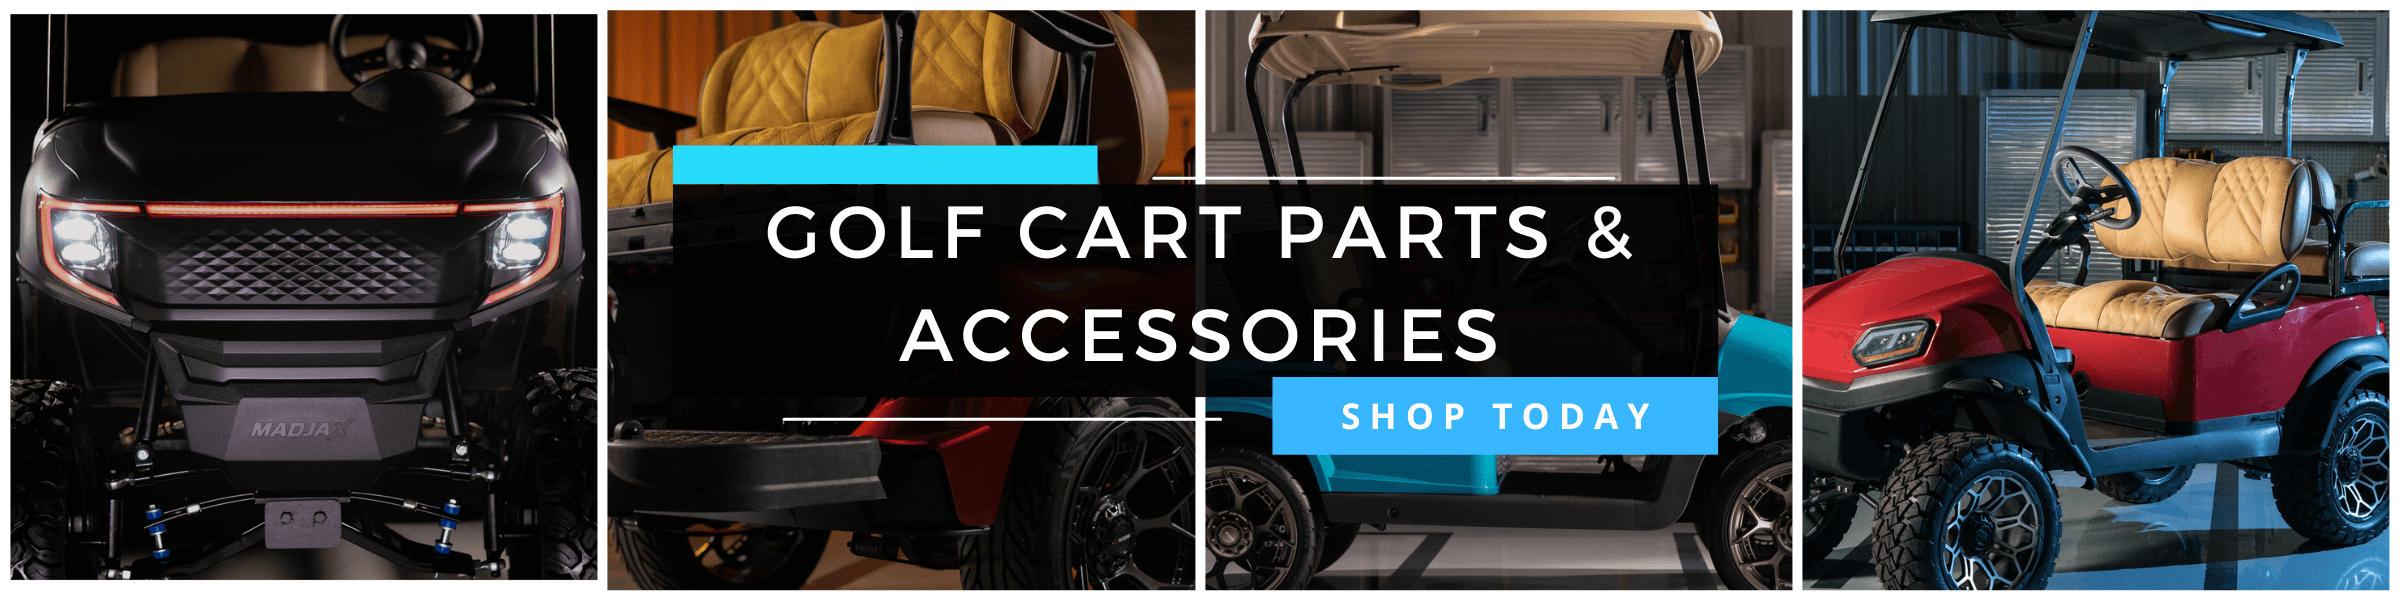 Golf Cart Parts & Accessories Online from Wild About Carts